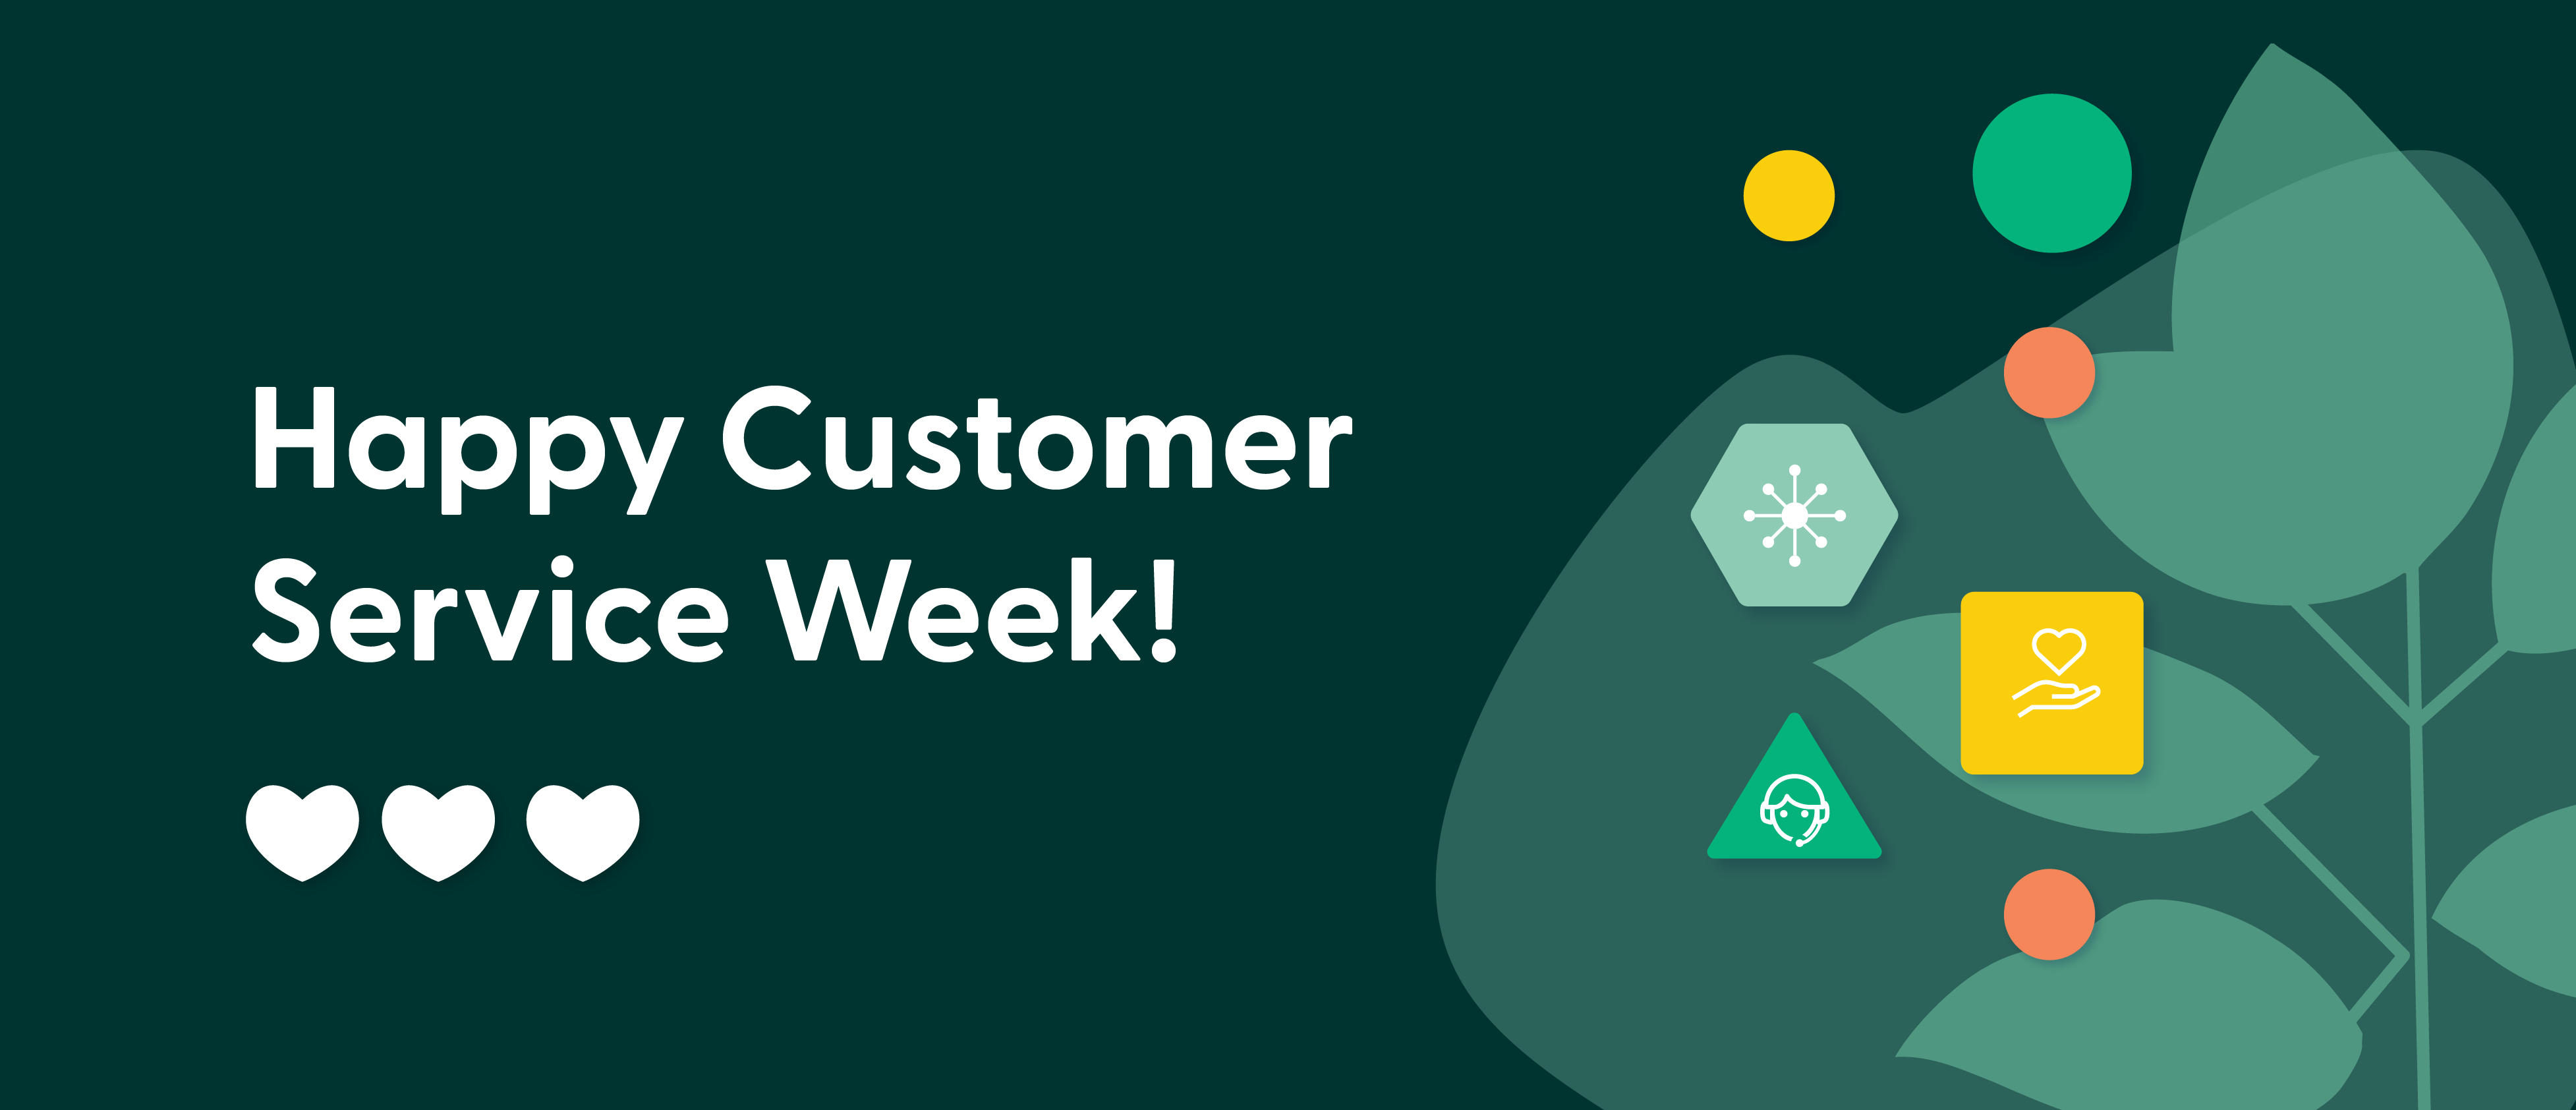 3 Ways to Celebrate Customer Centricity for Customer Service Week 2020